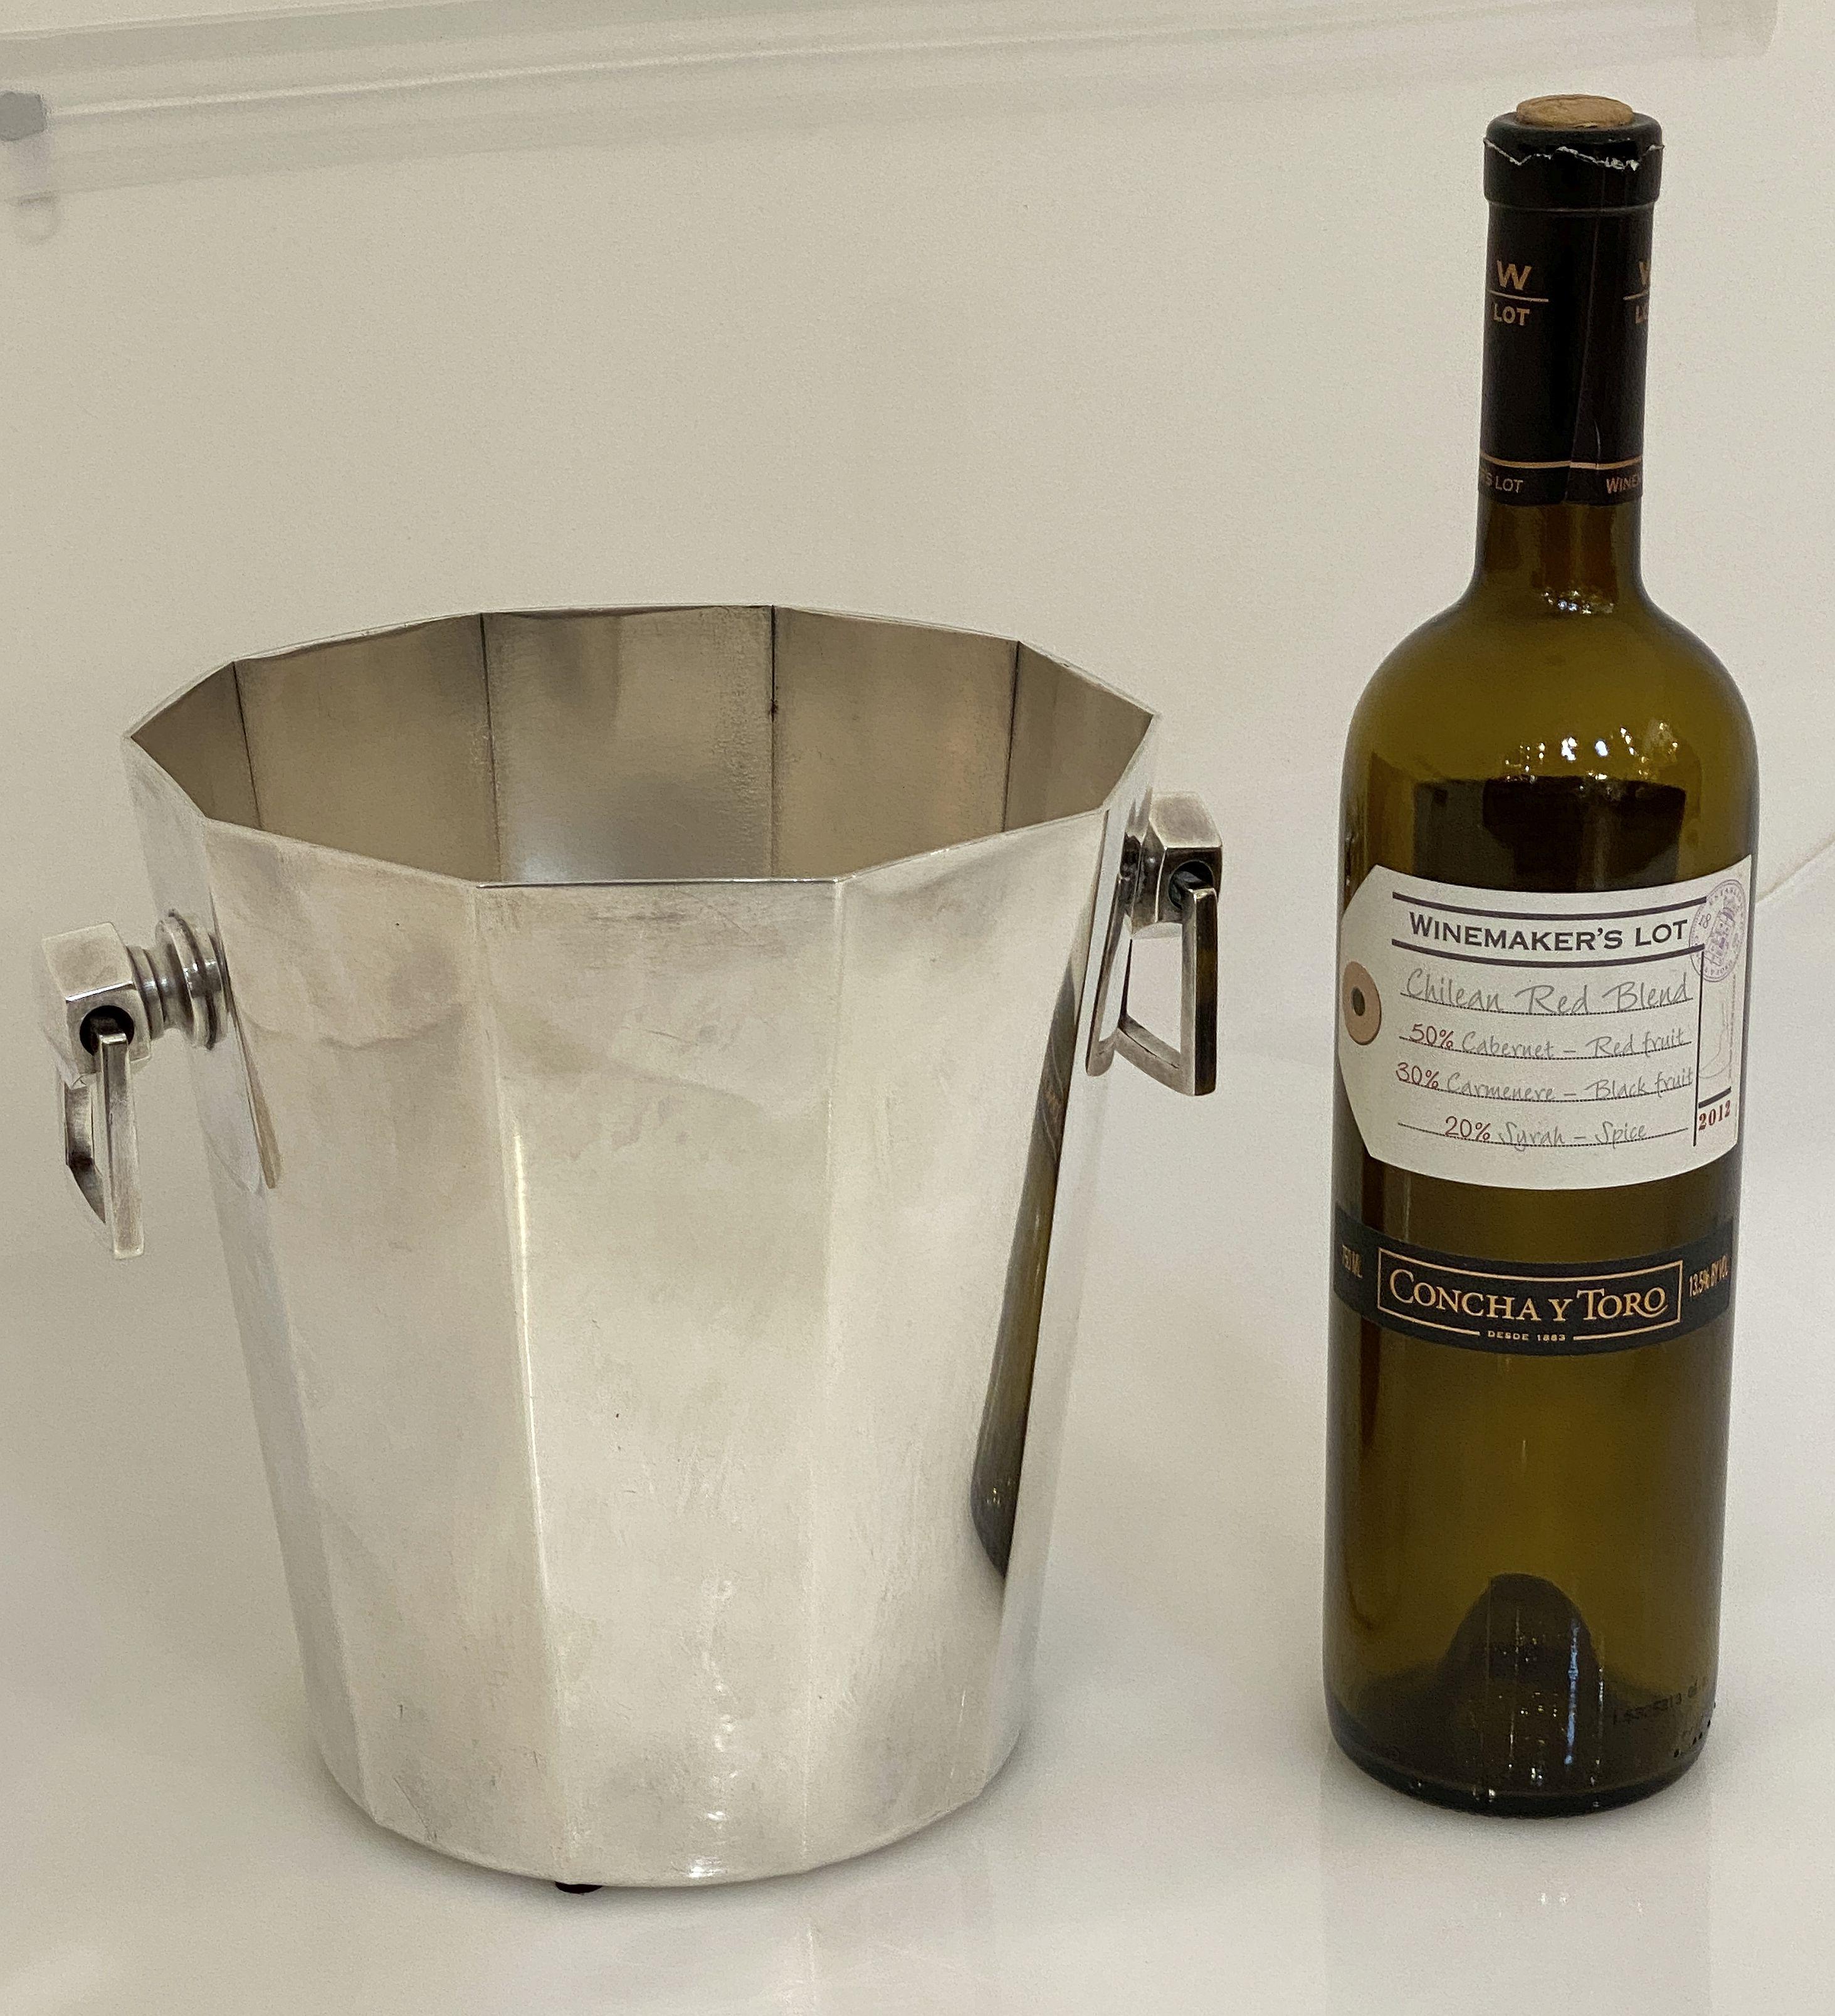 A faceted French champagne bucket or wine cooler of fine plate silver in the Modernist style, featuring an elegantly ten-sided tapering body with two opposing pendant handles.

Impressed hallmarks on base.

Dimensions are

Height 8 inches x Diameter